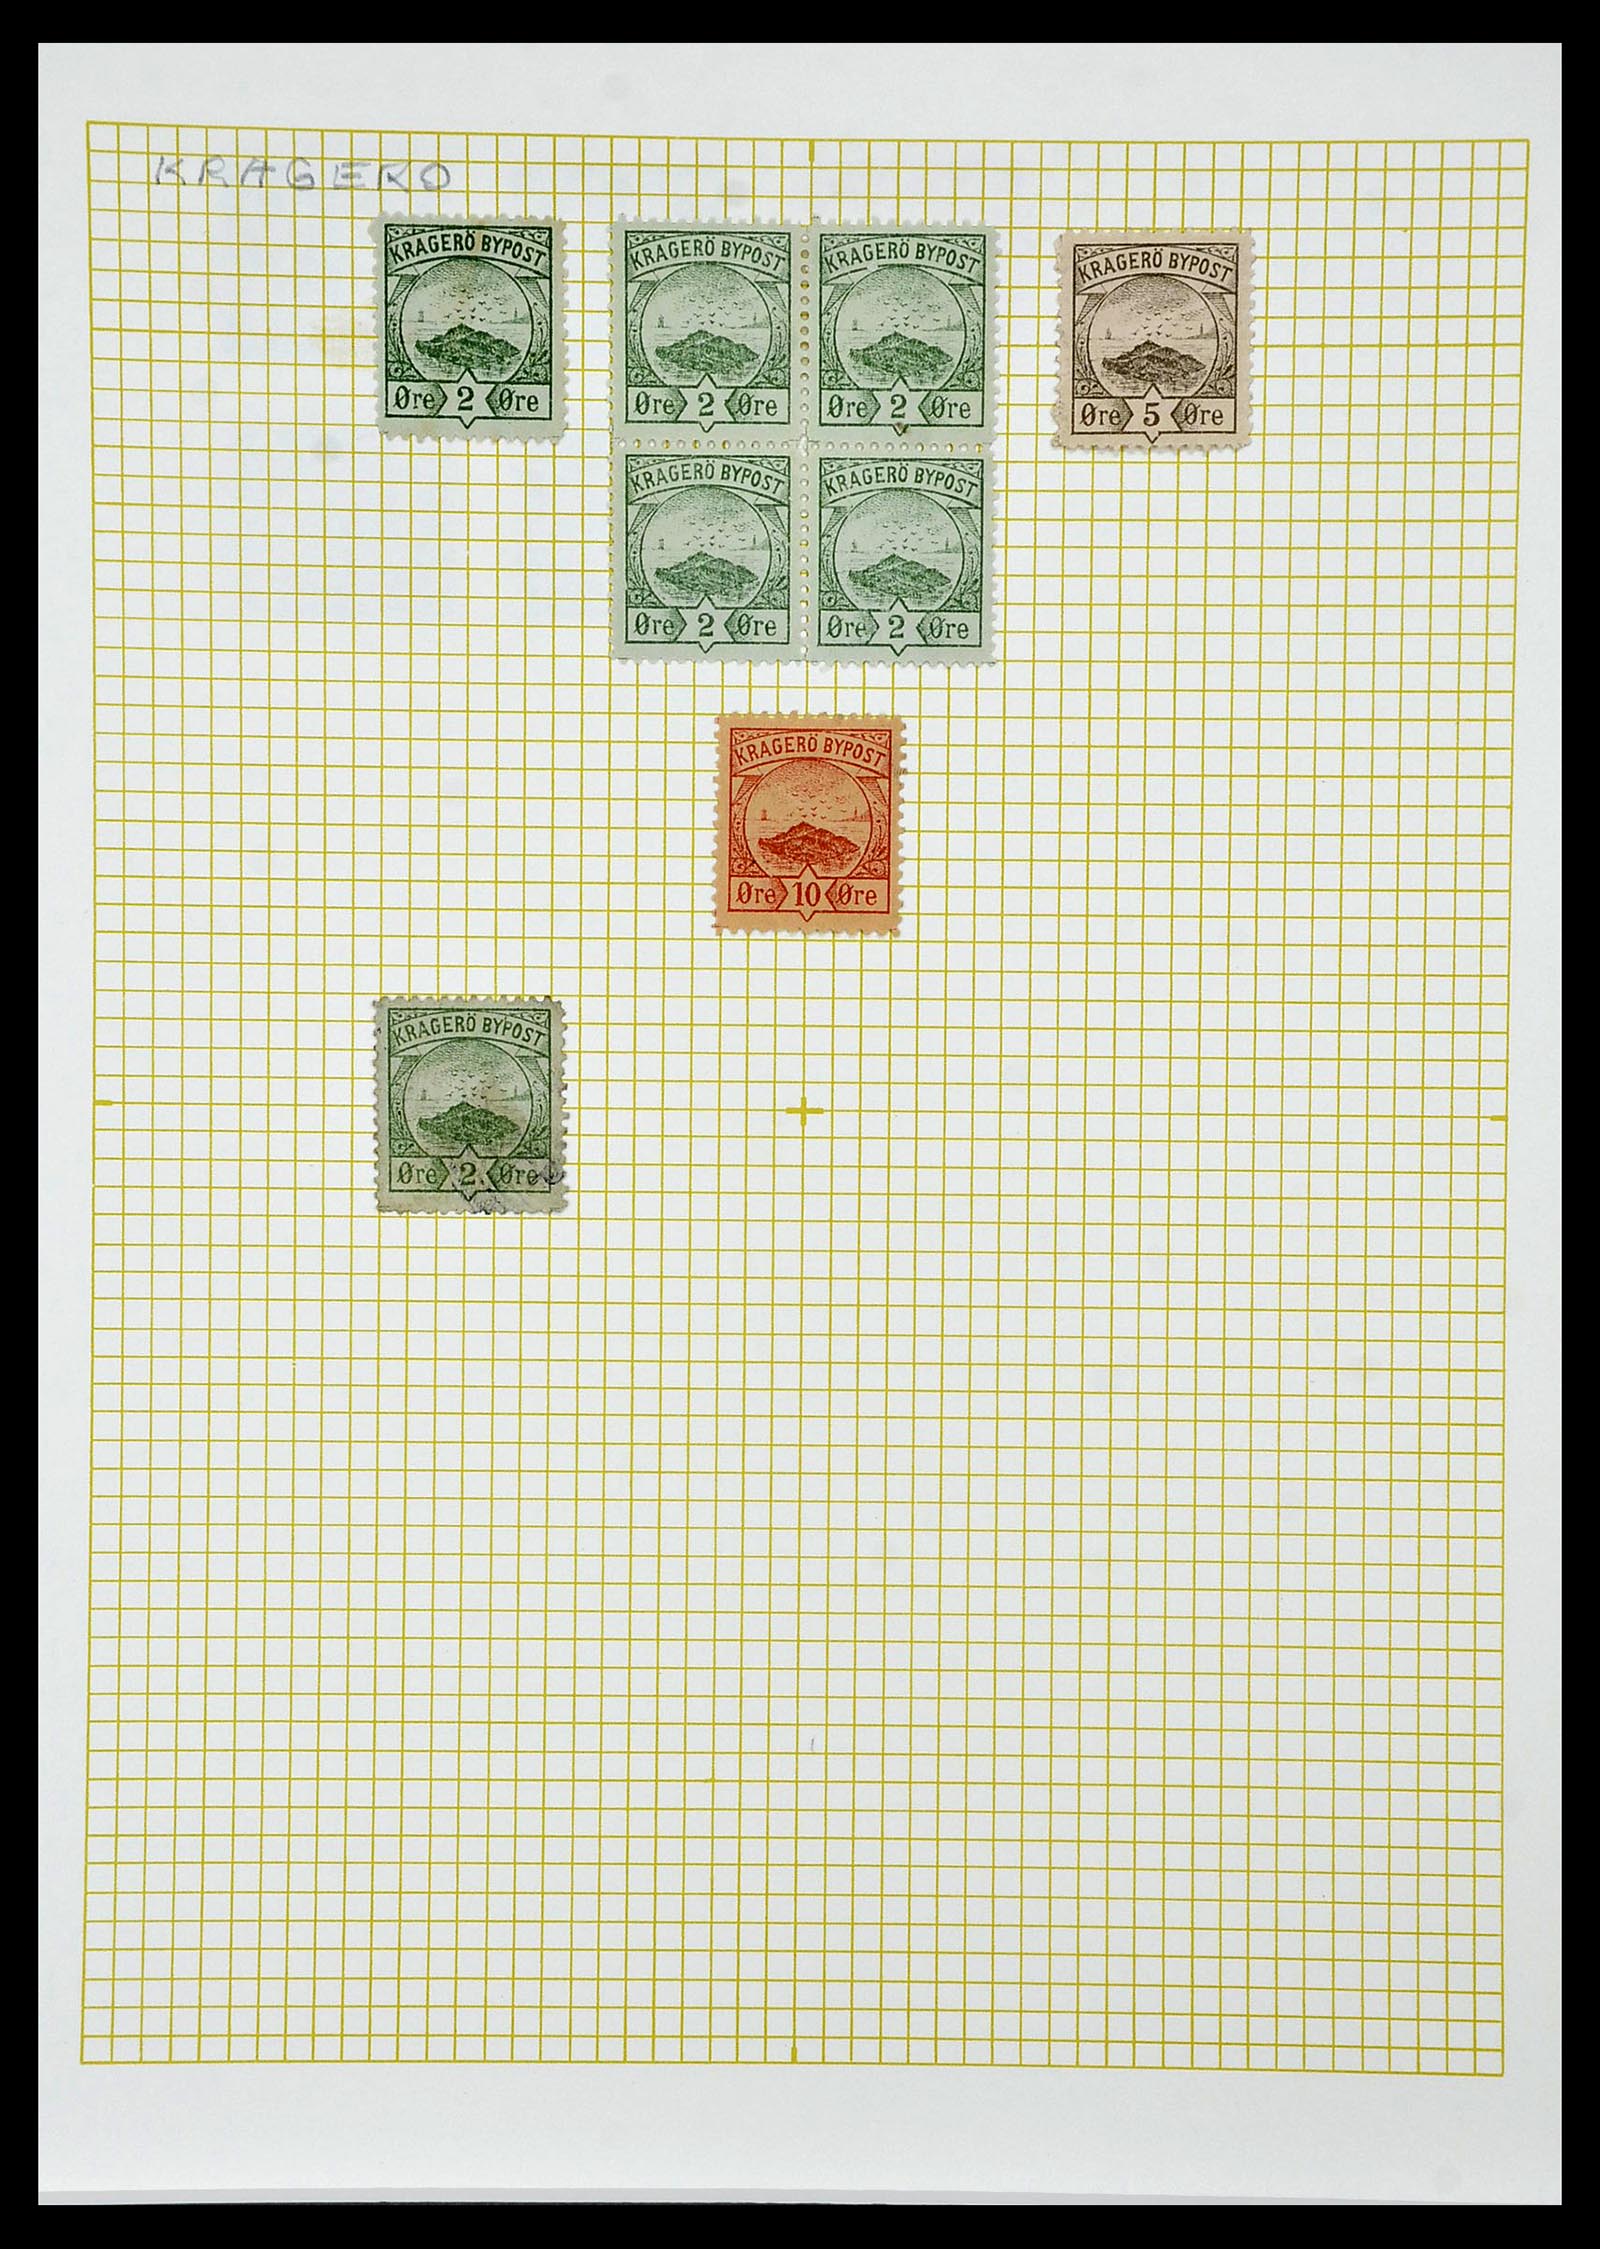 34344 033 - Stamp collection 34344 Scandinavia local post.